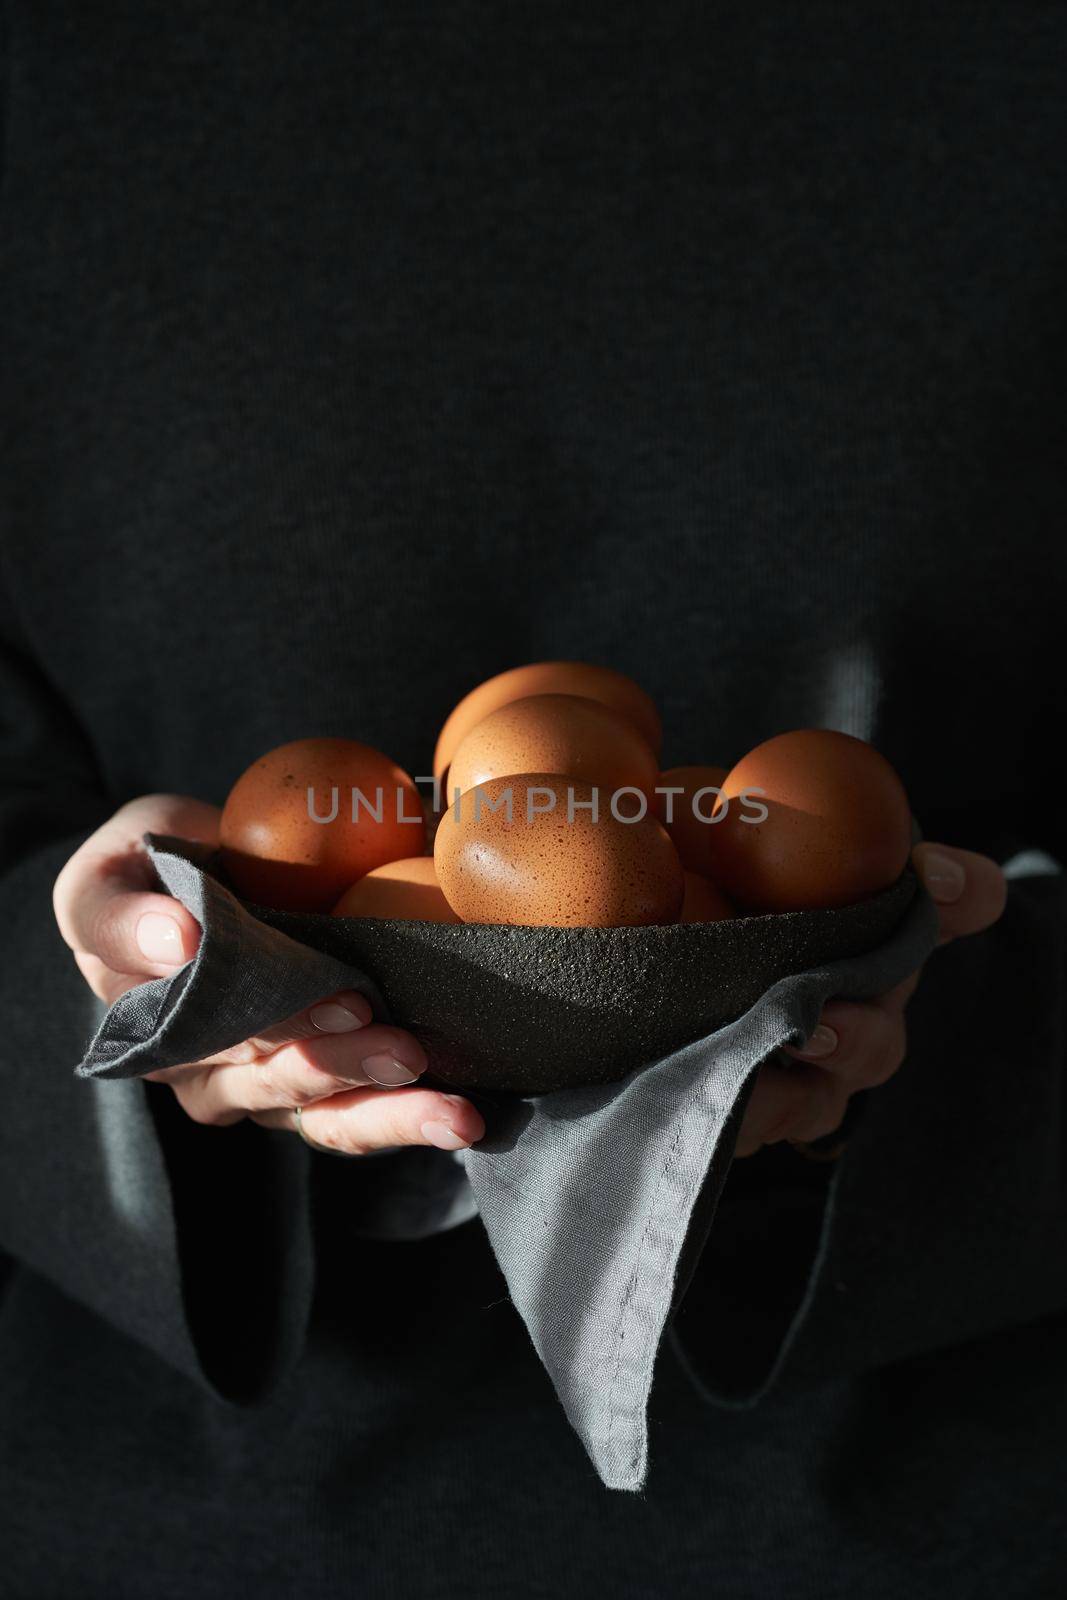 Unusual Easter on a dark background. A bowl of brown eggs with hands. by NataBene